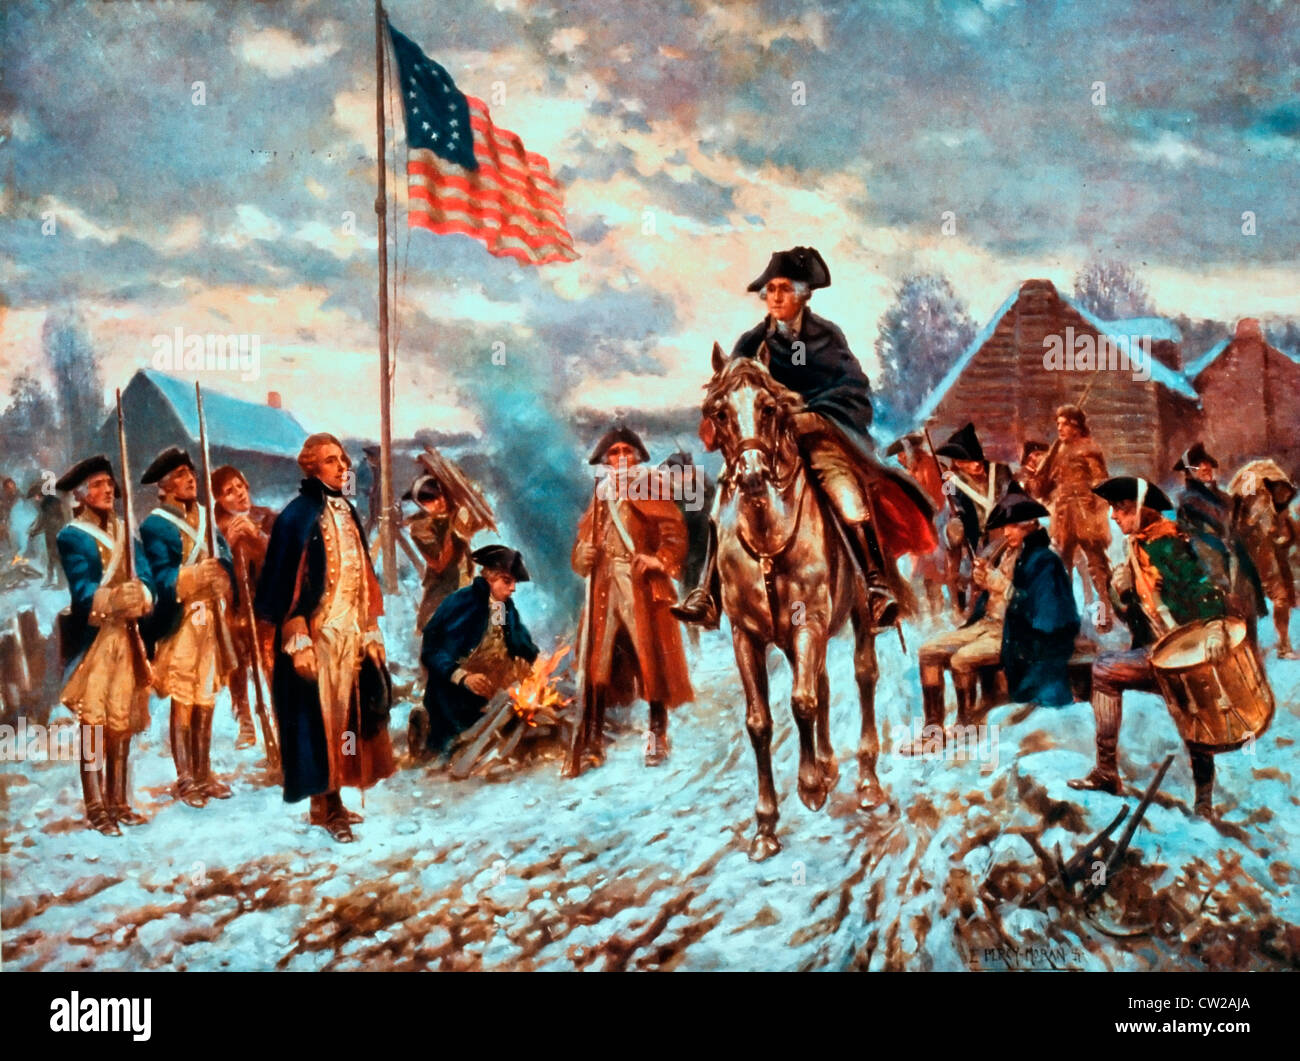 Washington at Valley Forge - George Washington on horseback in snow at Valley Forge. Stock Photo